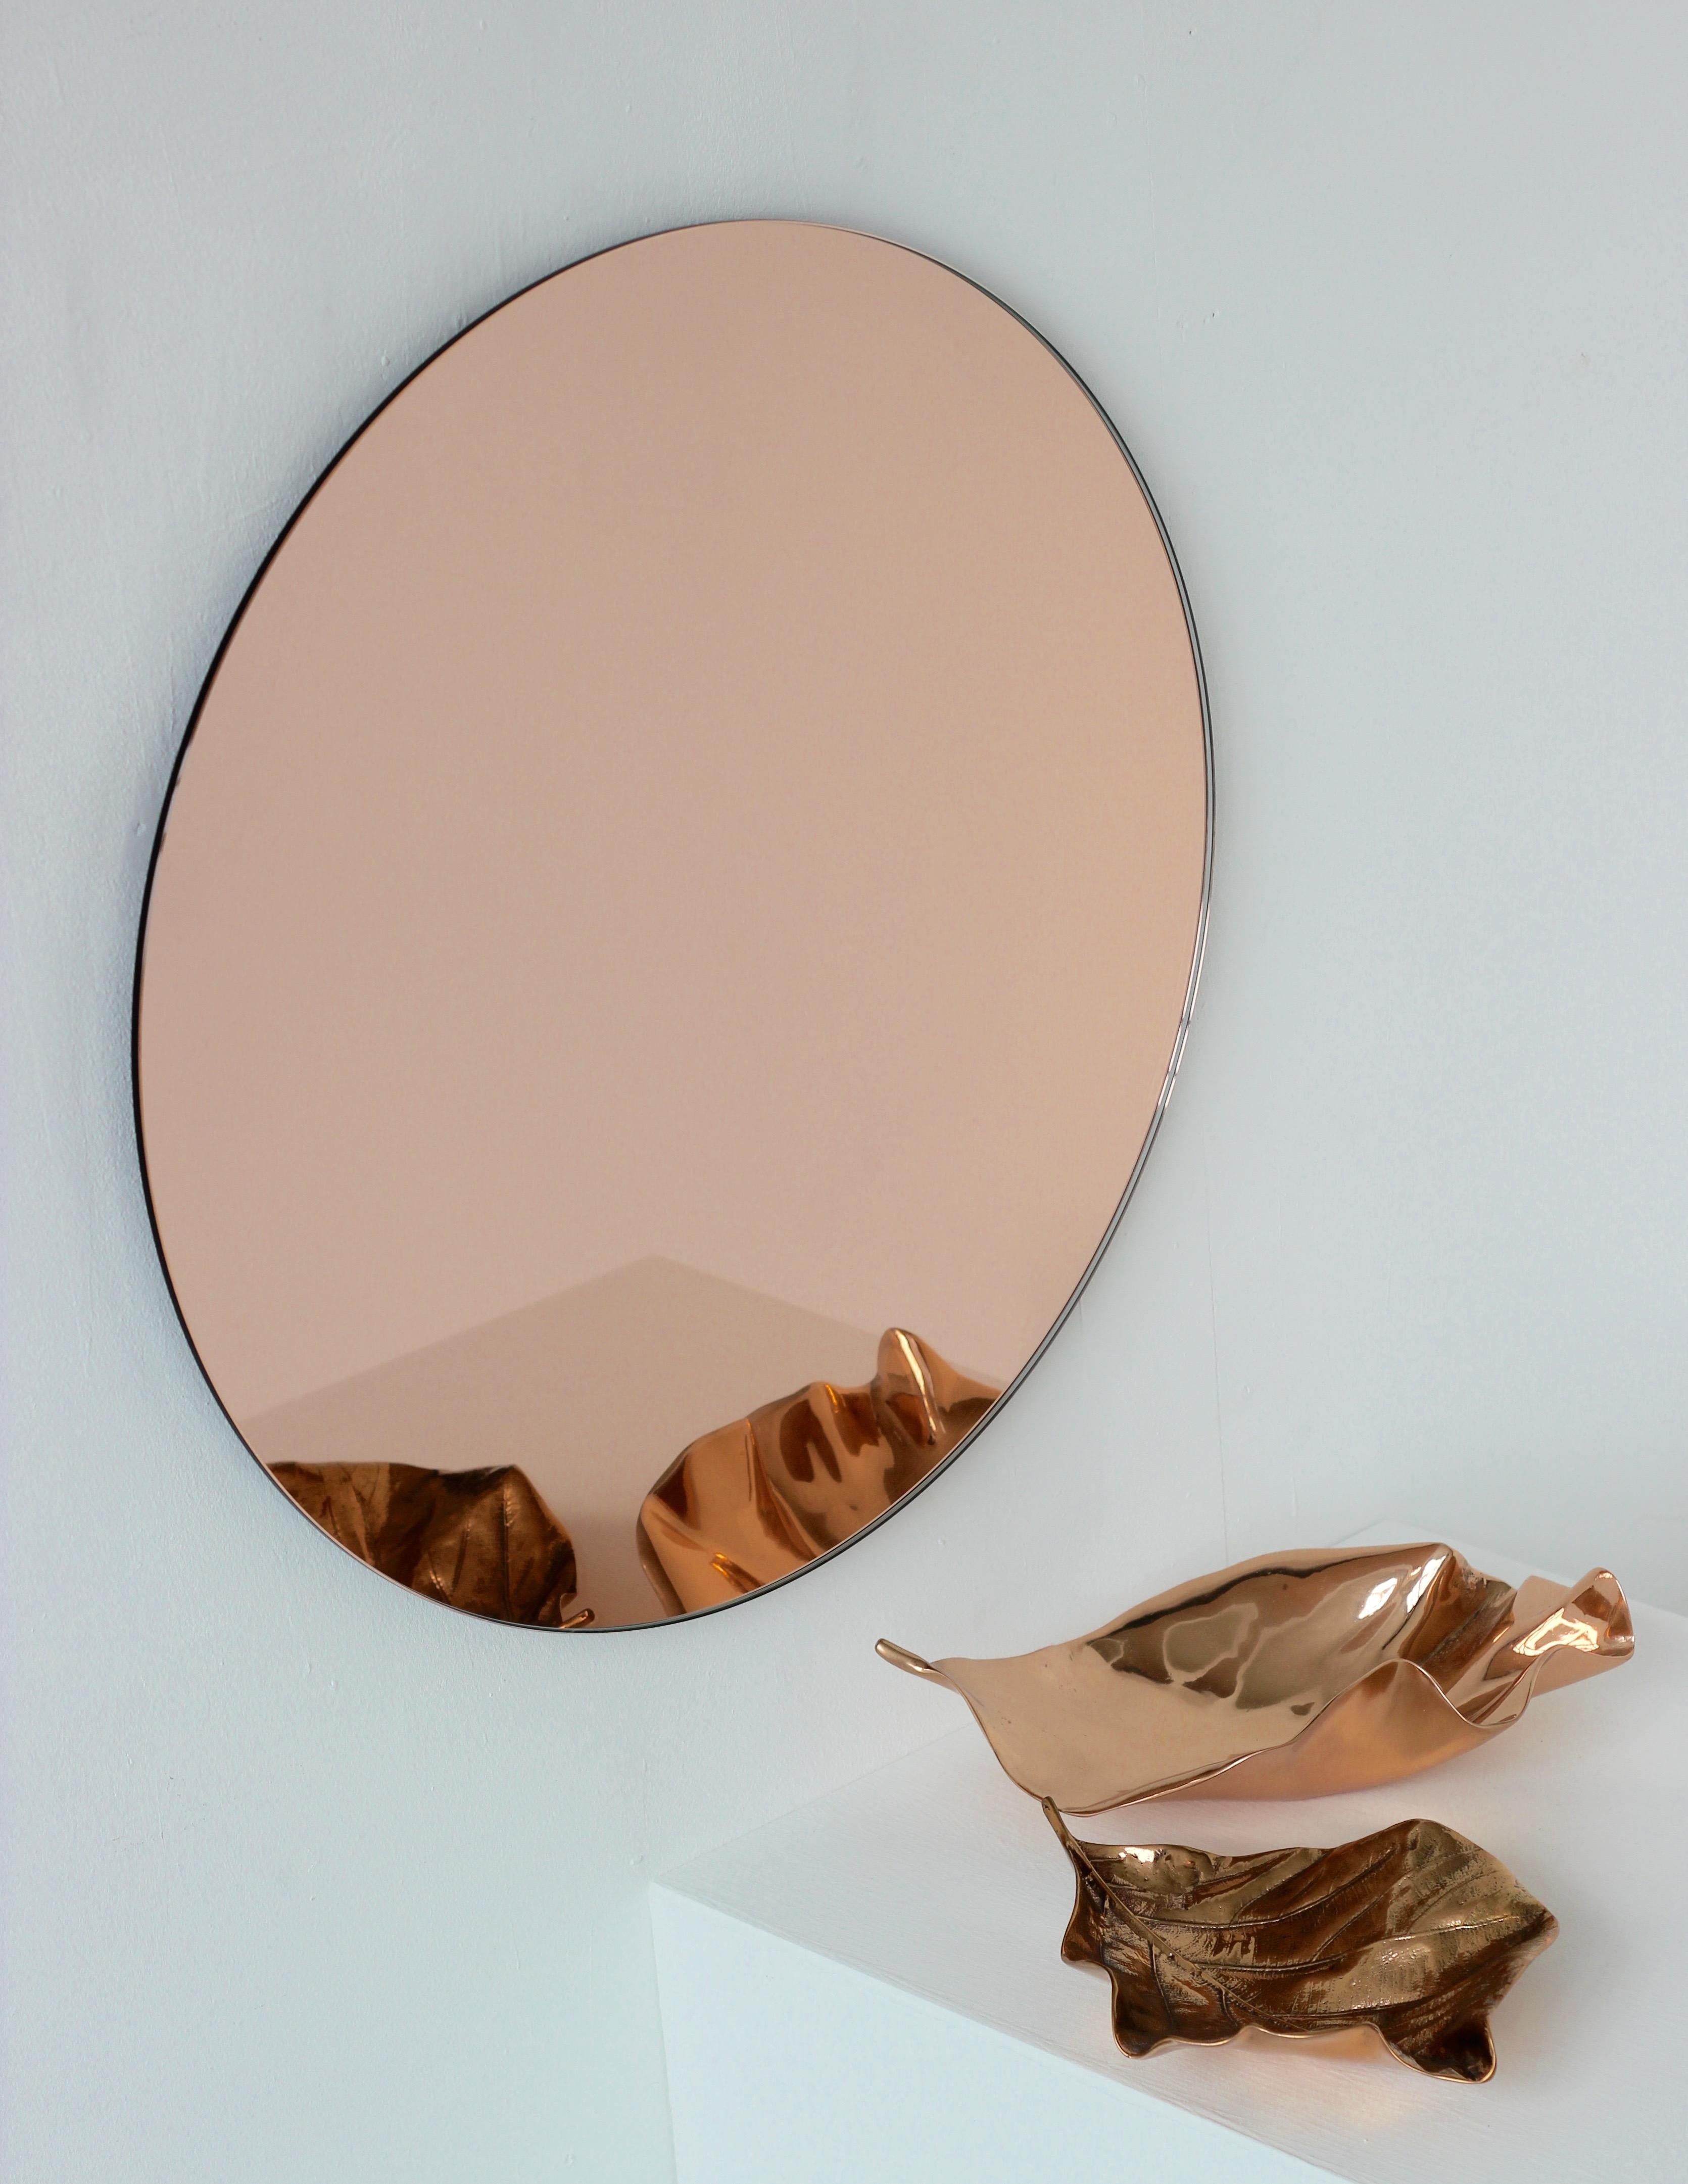 The images in this bespoke listing do not represent the approved modifications, and they refer to a standard size of the Orbis Rose Gold / Peach Tinted Round Modern Frameless. All specifications for this particular listing are as detailed in the